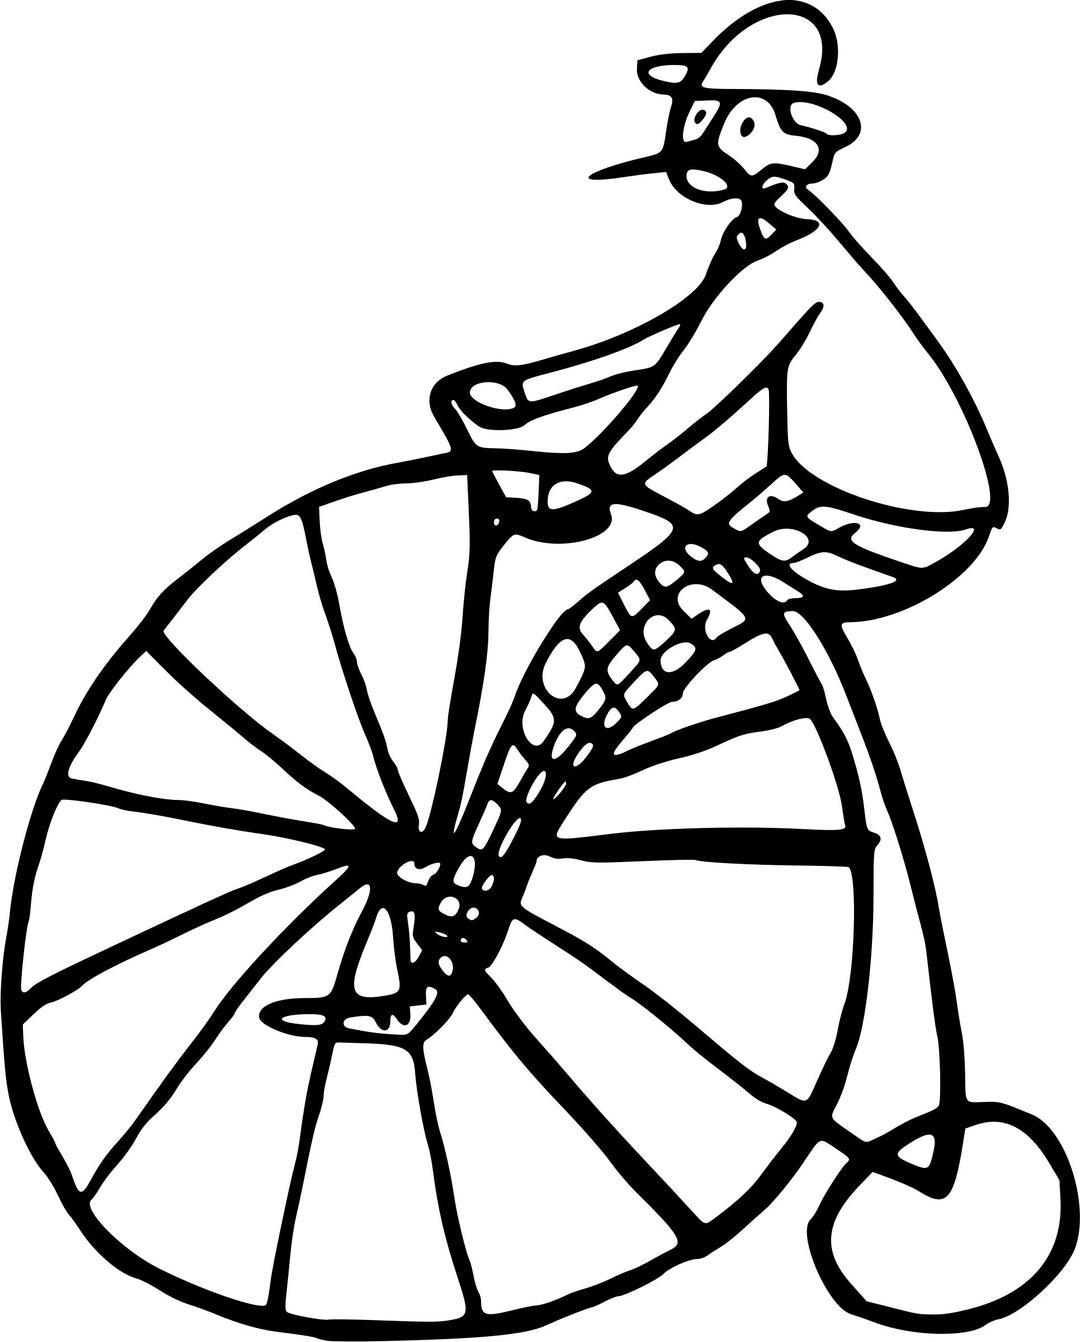 Penny farthing png transparent